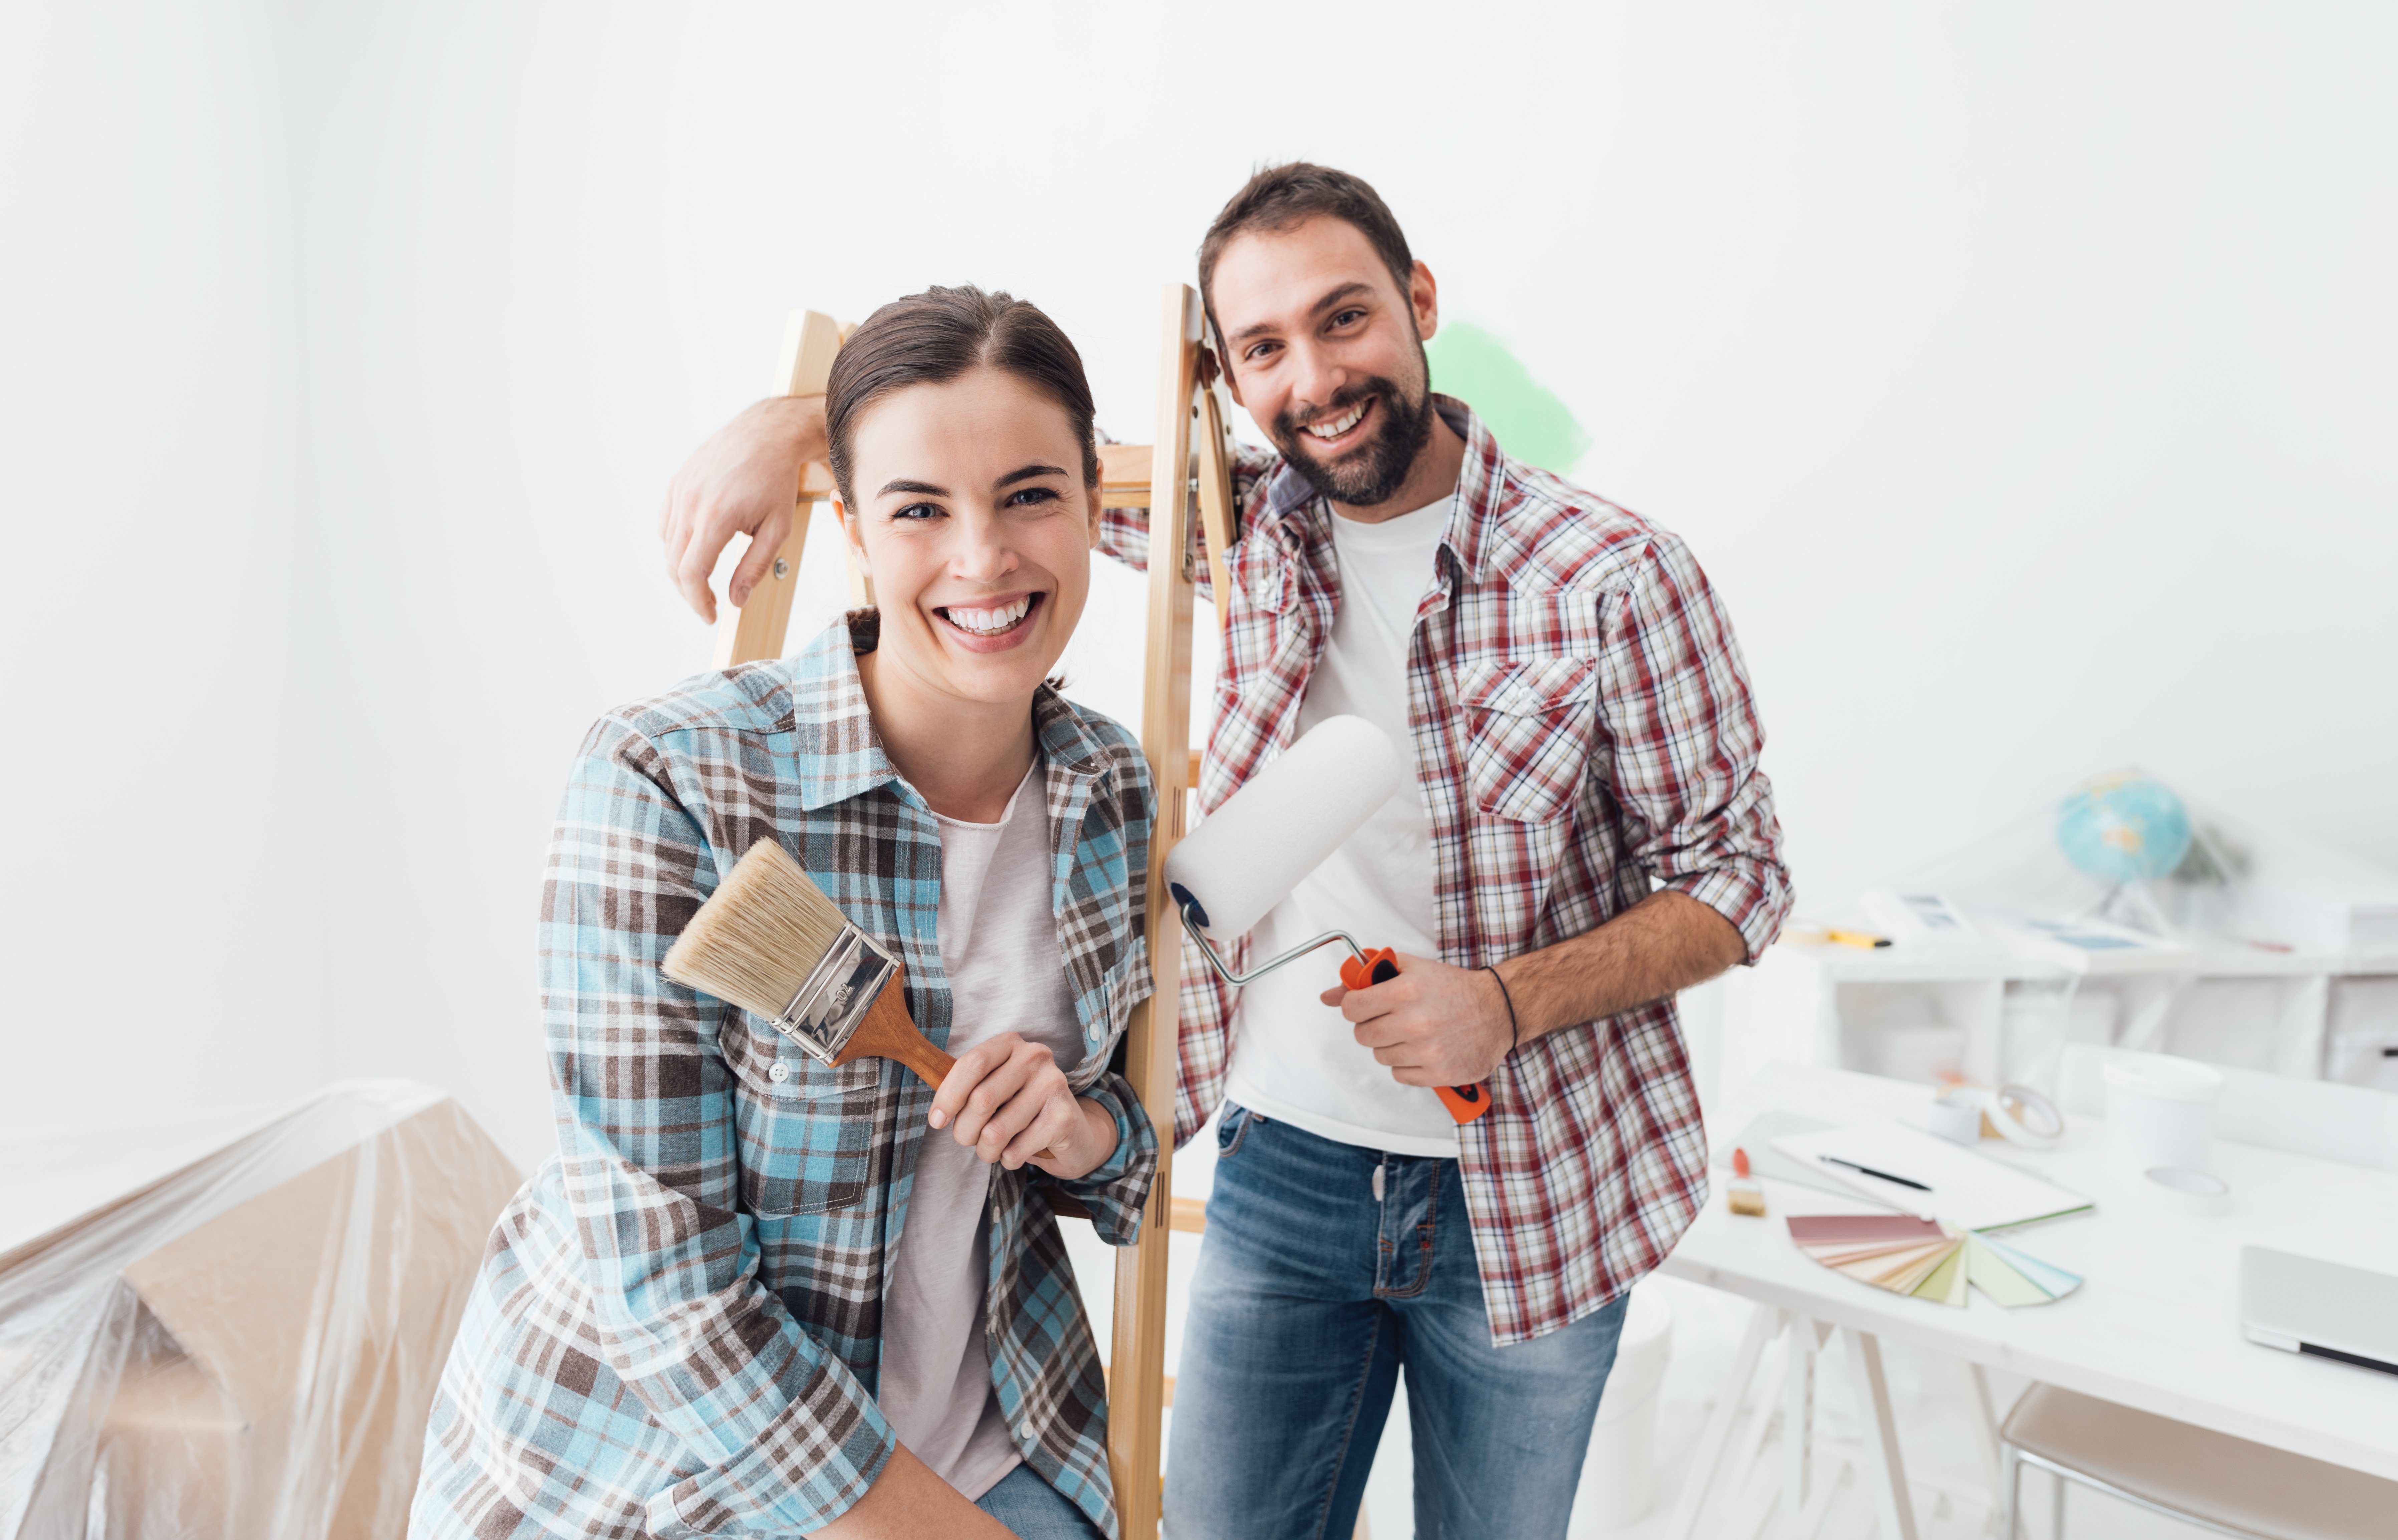 A man and woman painting their home. | Photo: Shutterstock